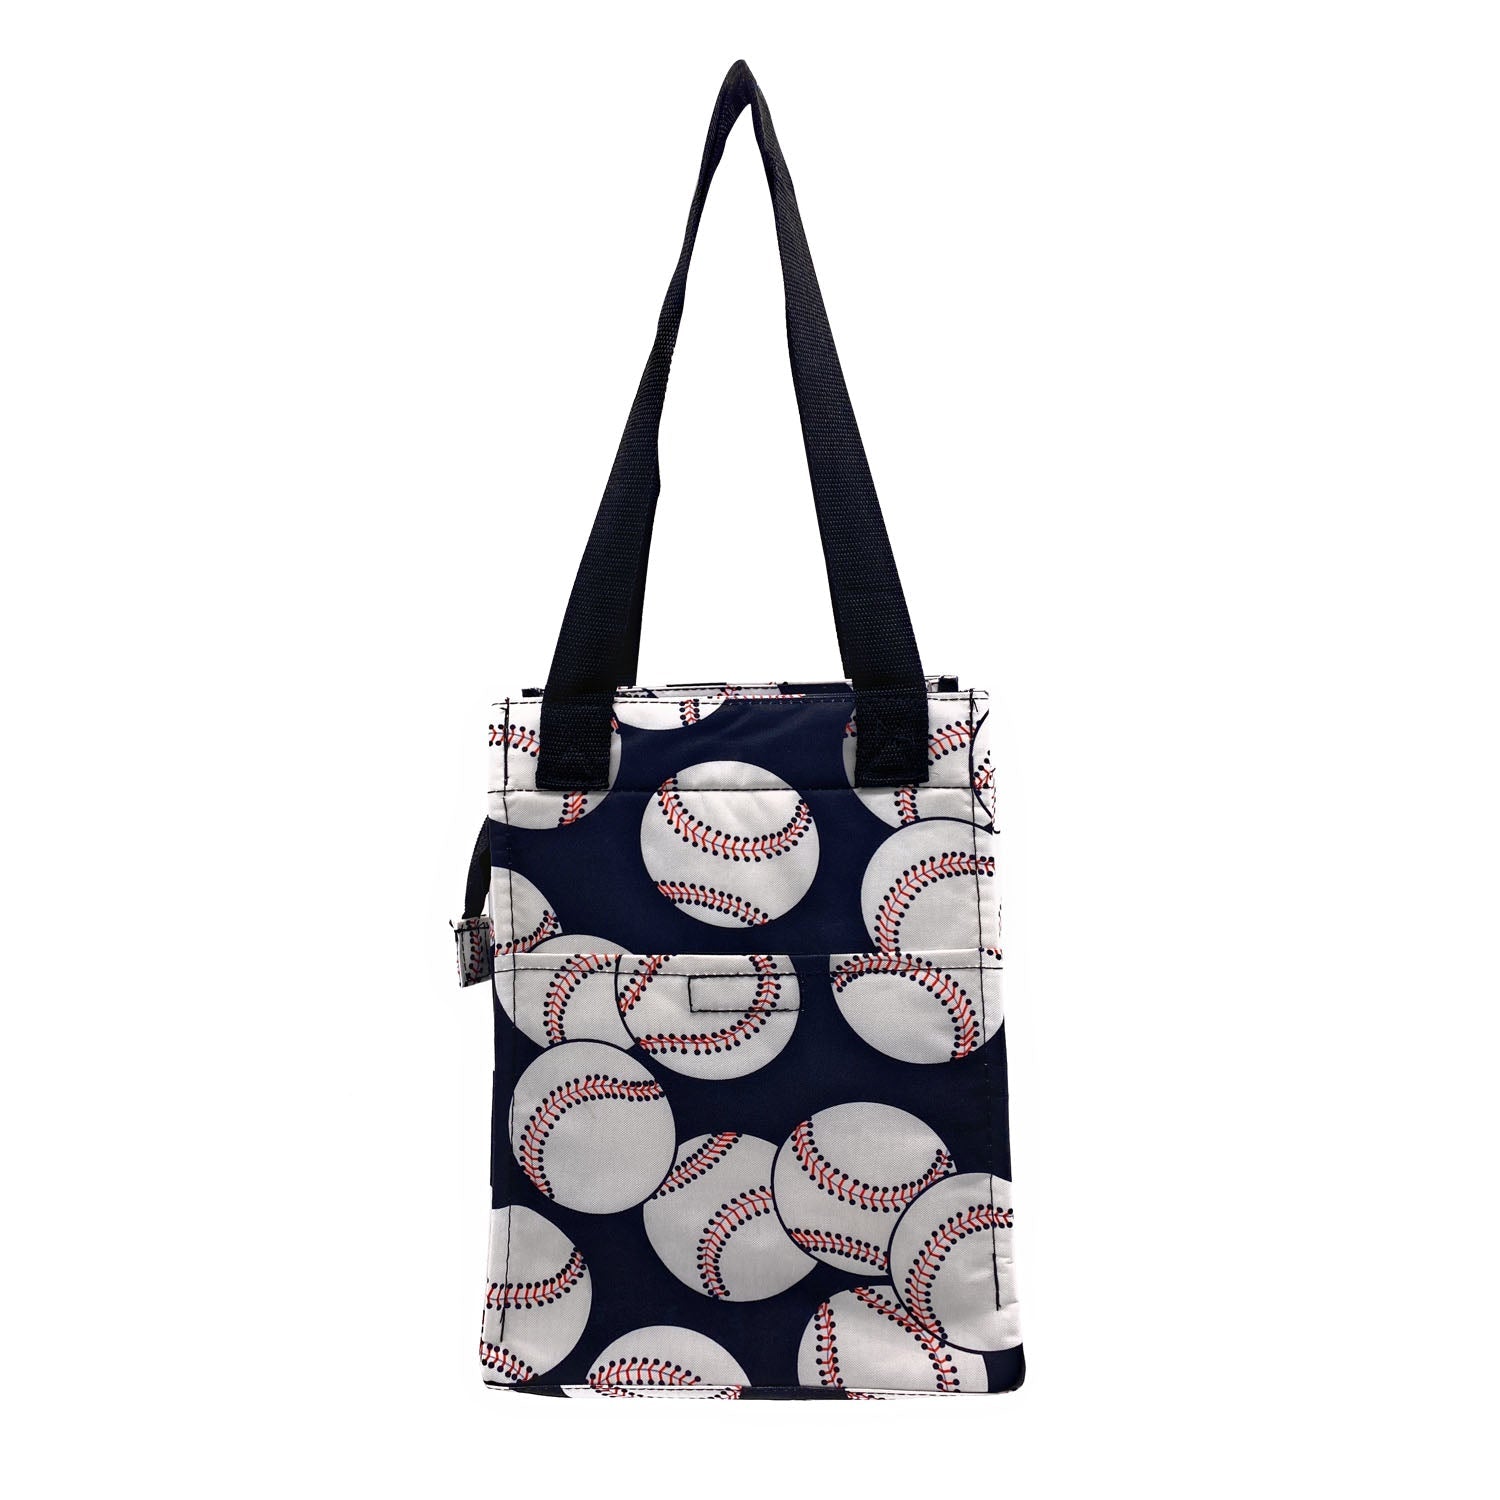 Monogrammed Insulated Lunch Tote - BLACK/WHITE